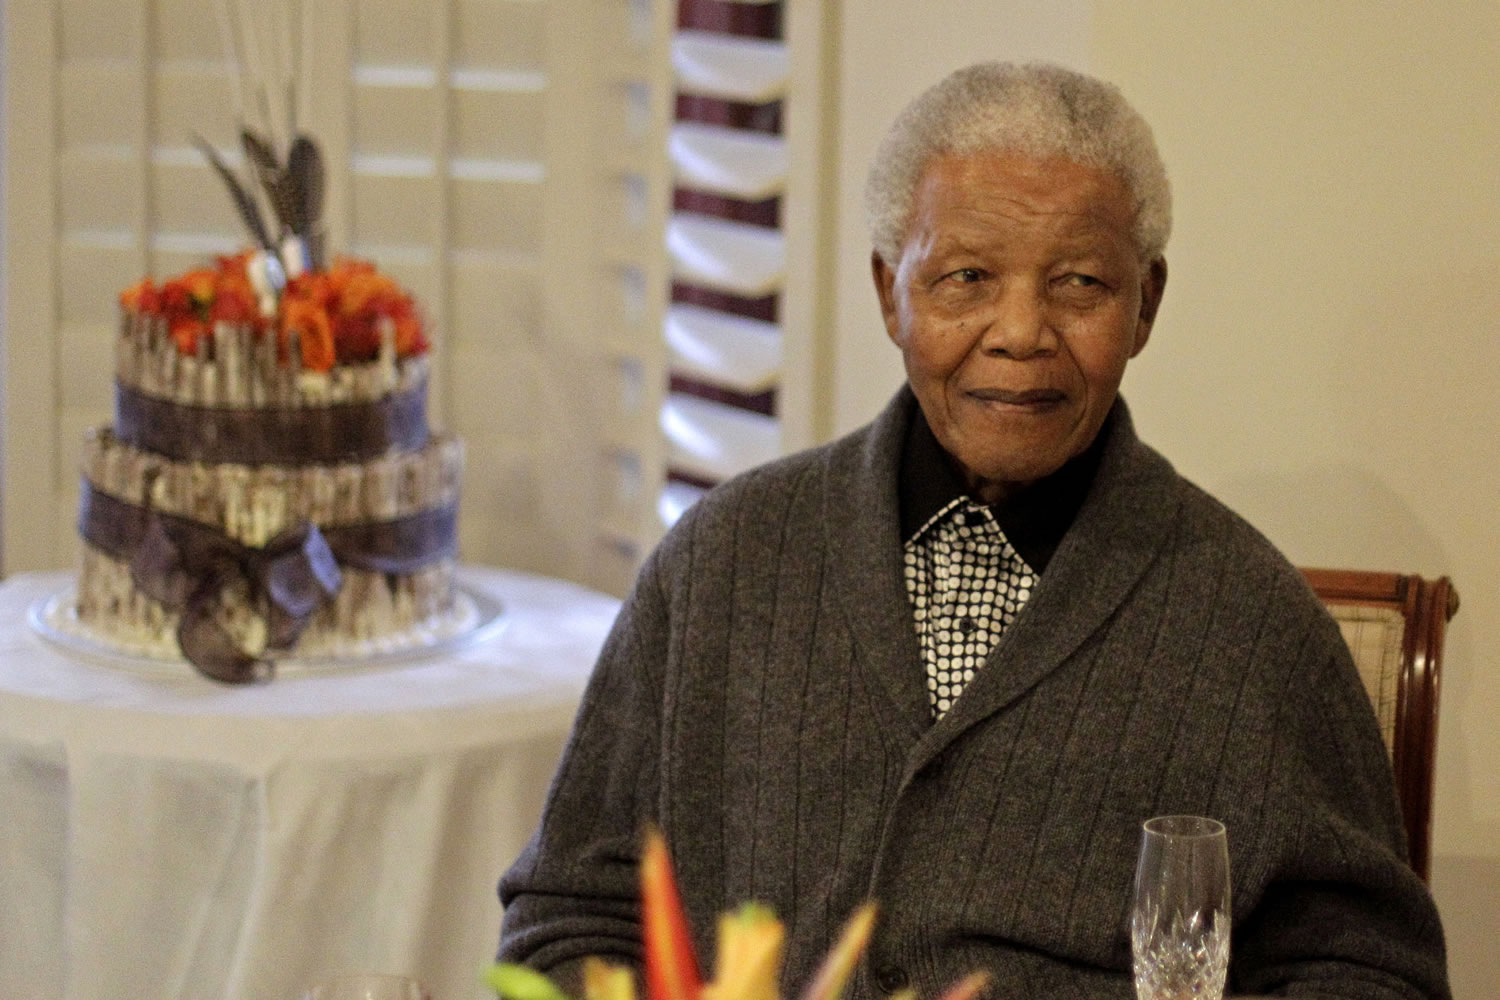 Former South African President Nelson Mandela celebrates his birthday July 18, 2012, with family in Qunu, South Africa.